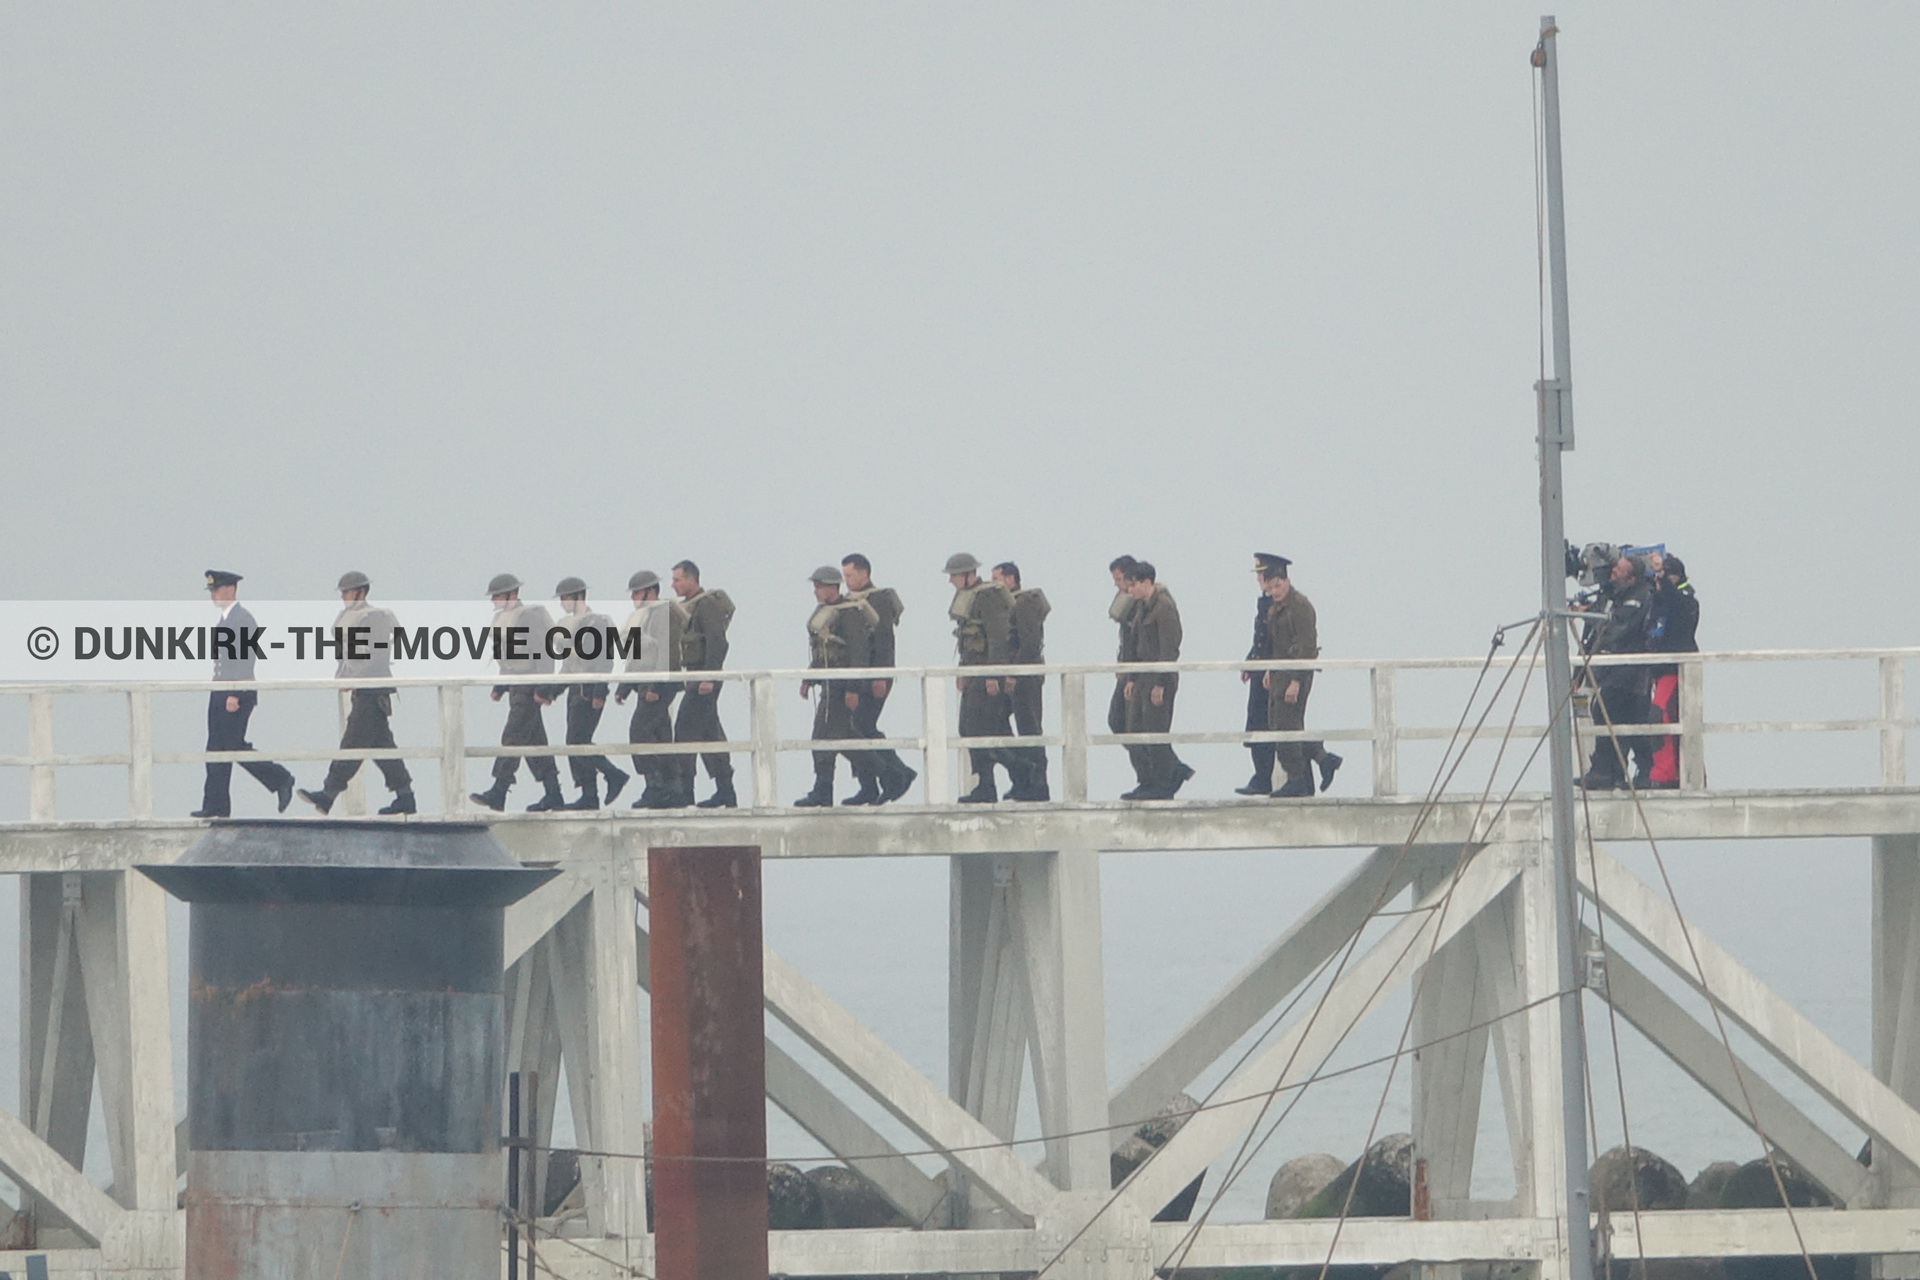 Picture with actor, IMAX camera, grey sky, decor, supernumeraries, Hoyte van Hoytema, EST pier,  from behind the scene of the Dunkirk movie by Nolan